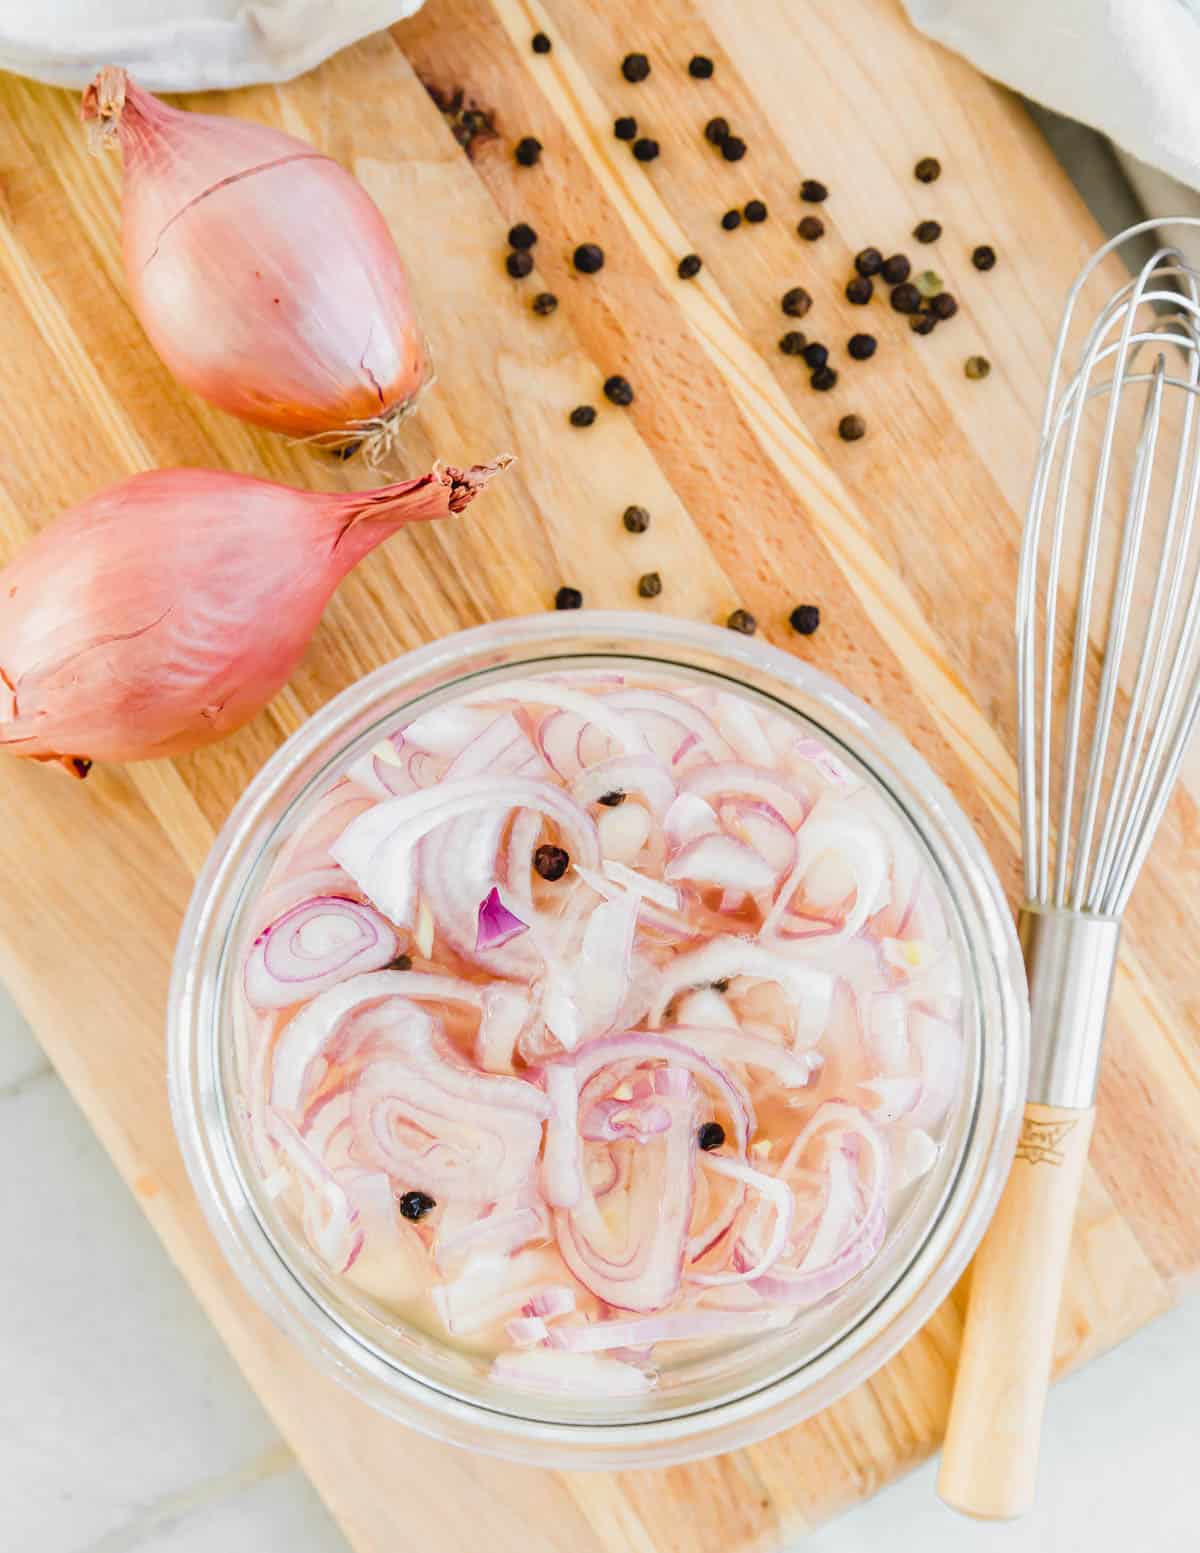 Quick pickled shallots in a glass jar with peppercorns.